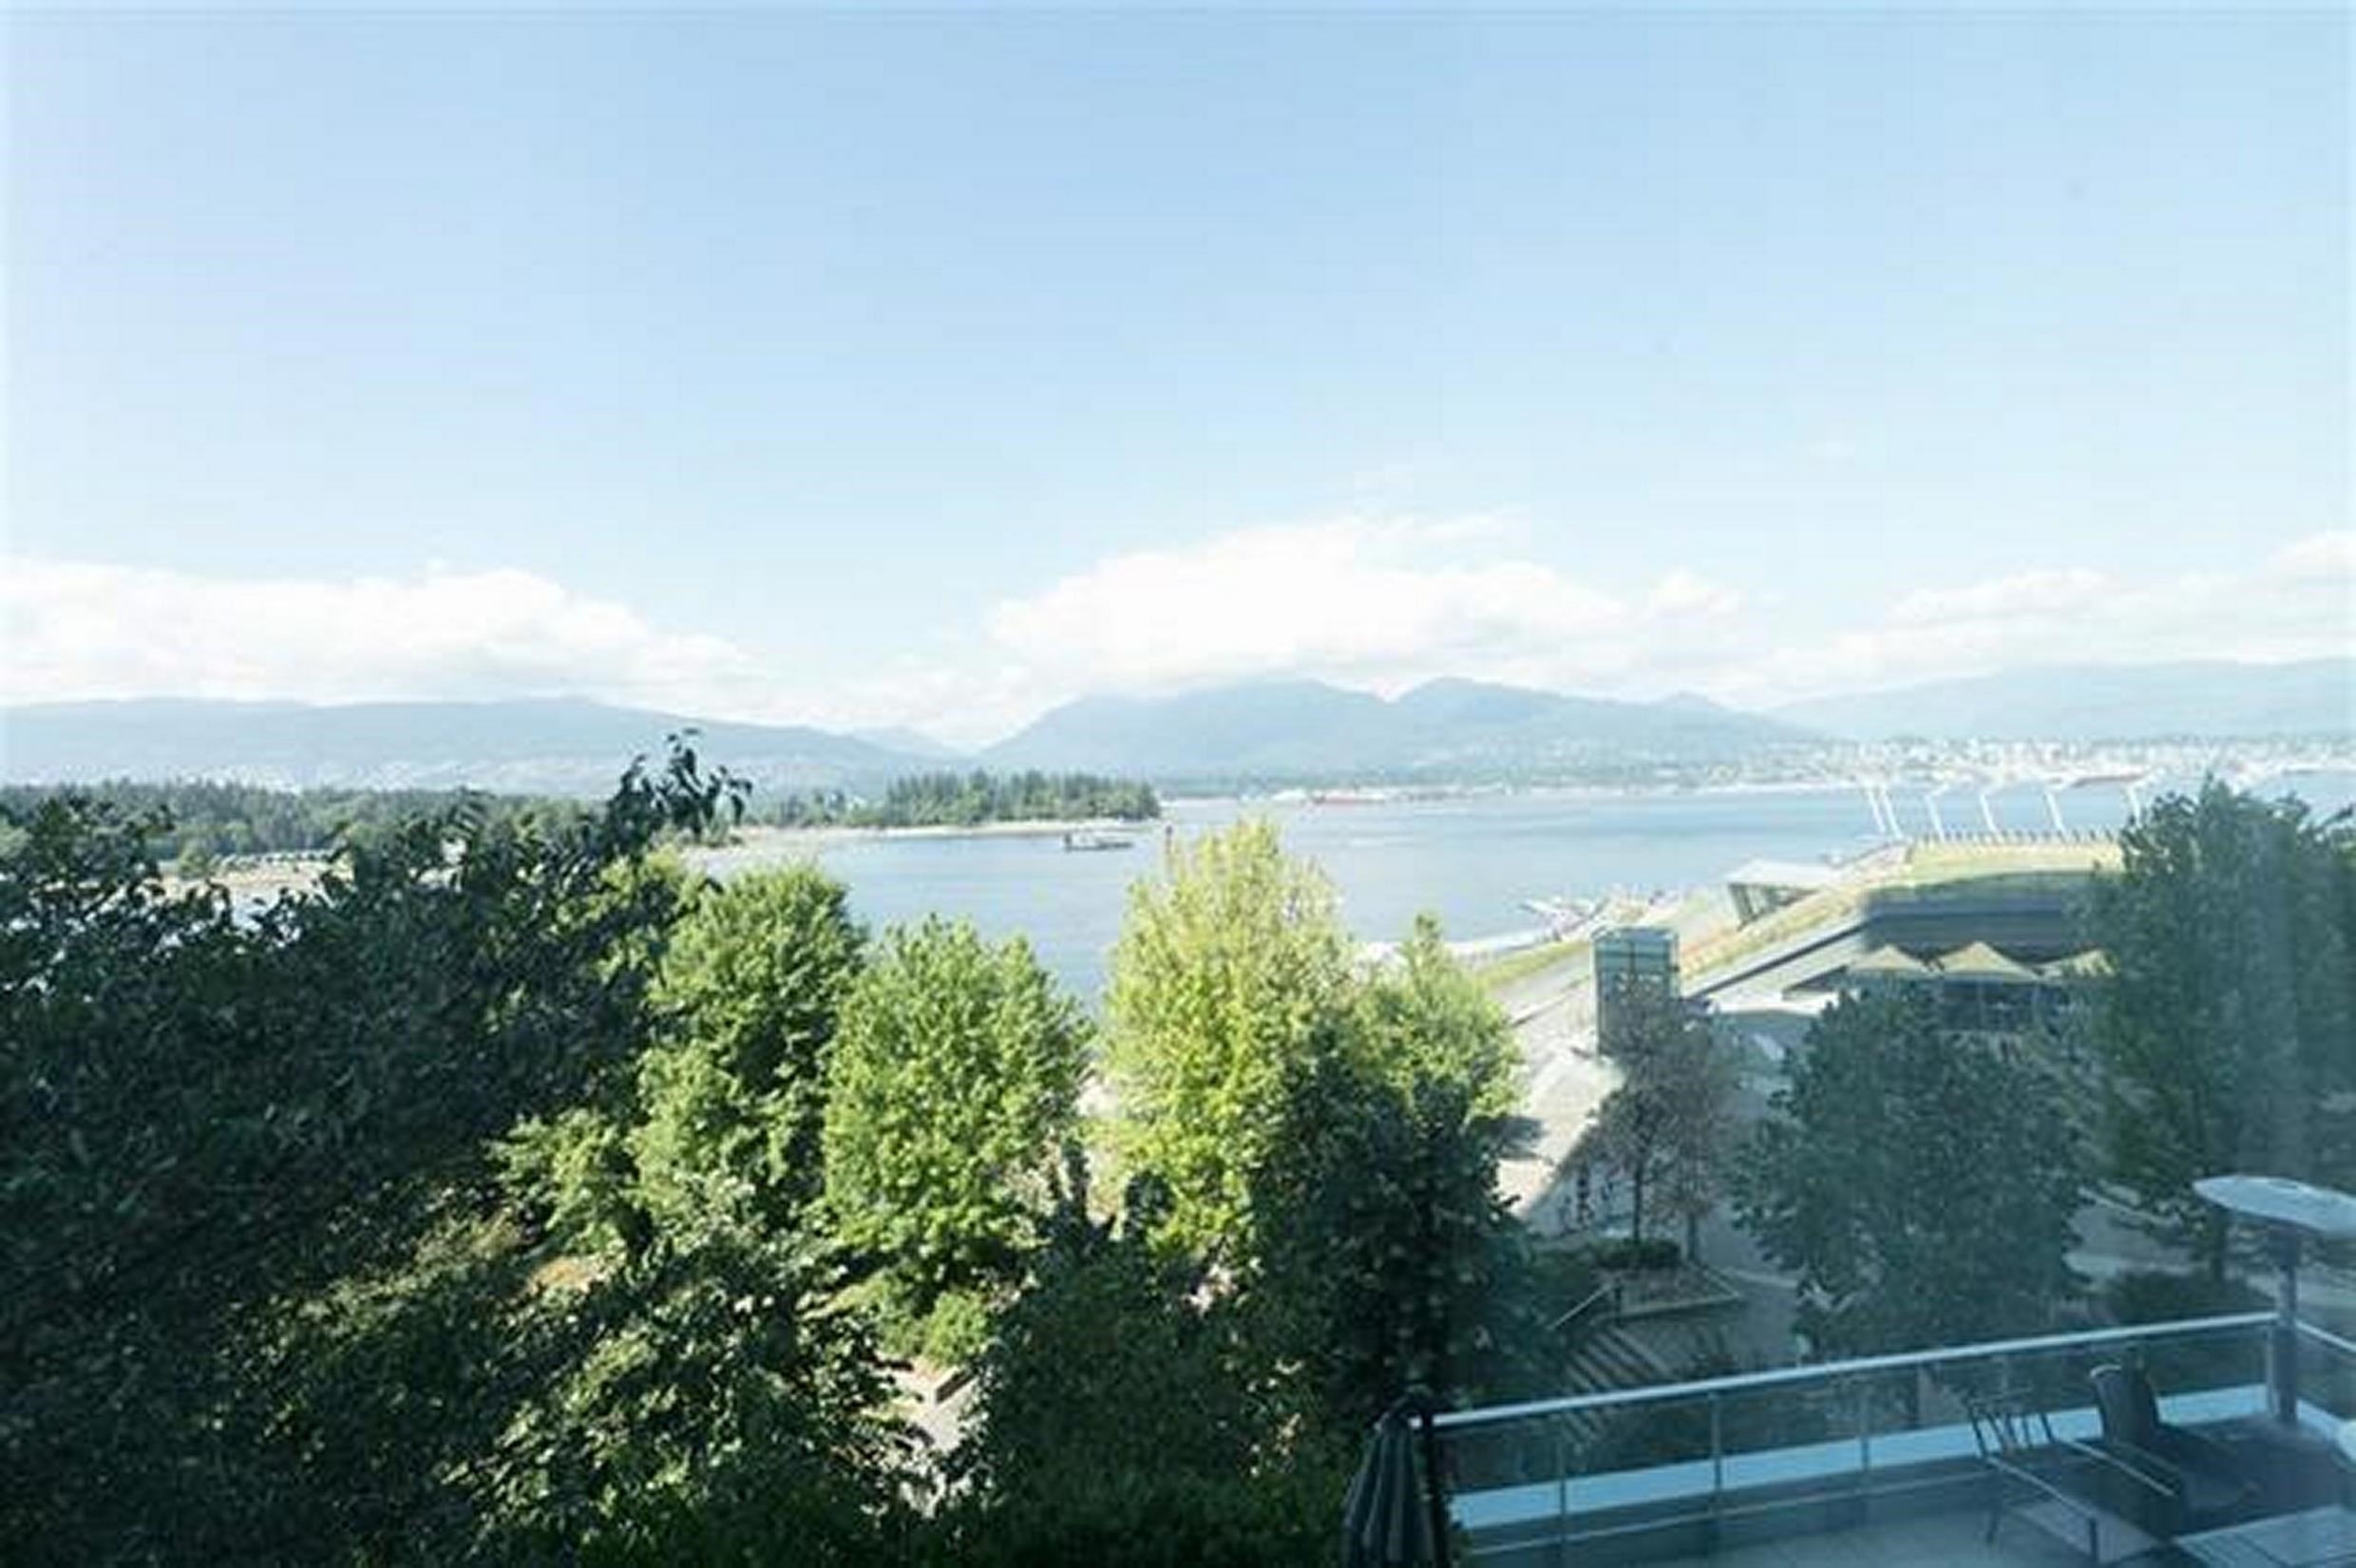 Coal Harbour Apartment/Condo for sale:  3 bedroom 3,366 sq.ft. (Listed 2022-02-08)